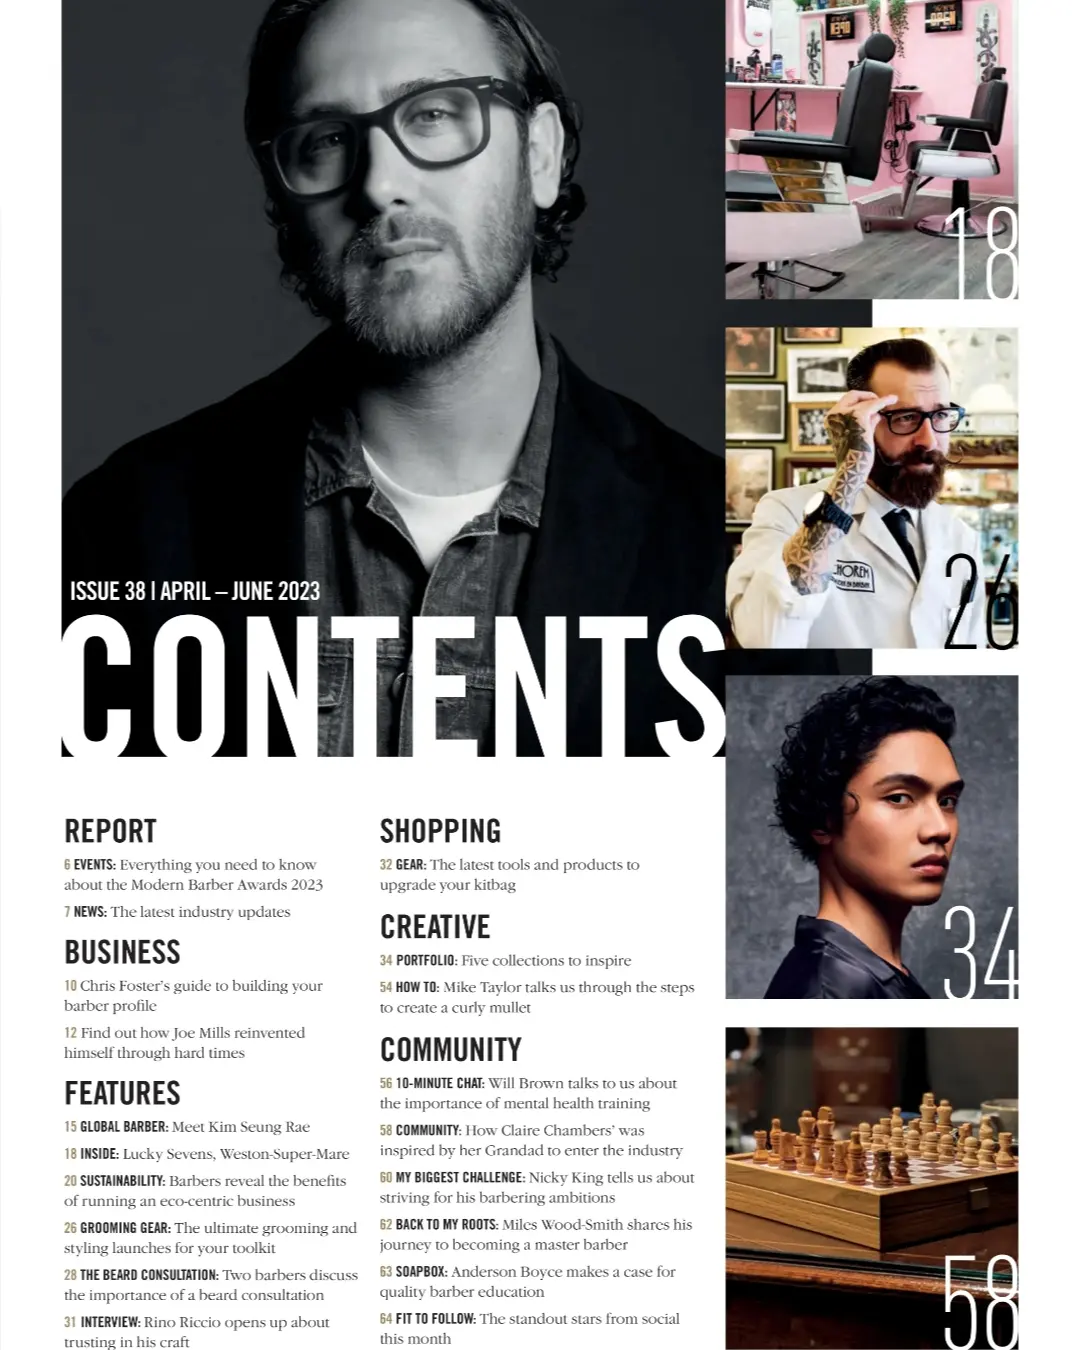 Eagle & Bear In Modern Barber Magazine - Contents